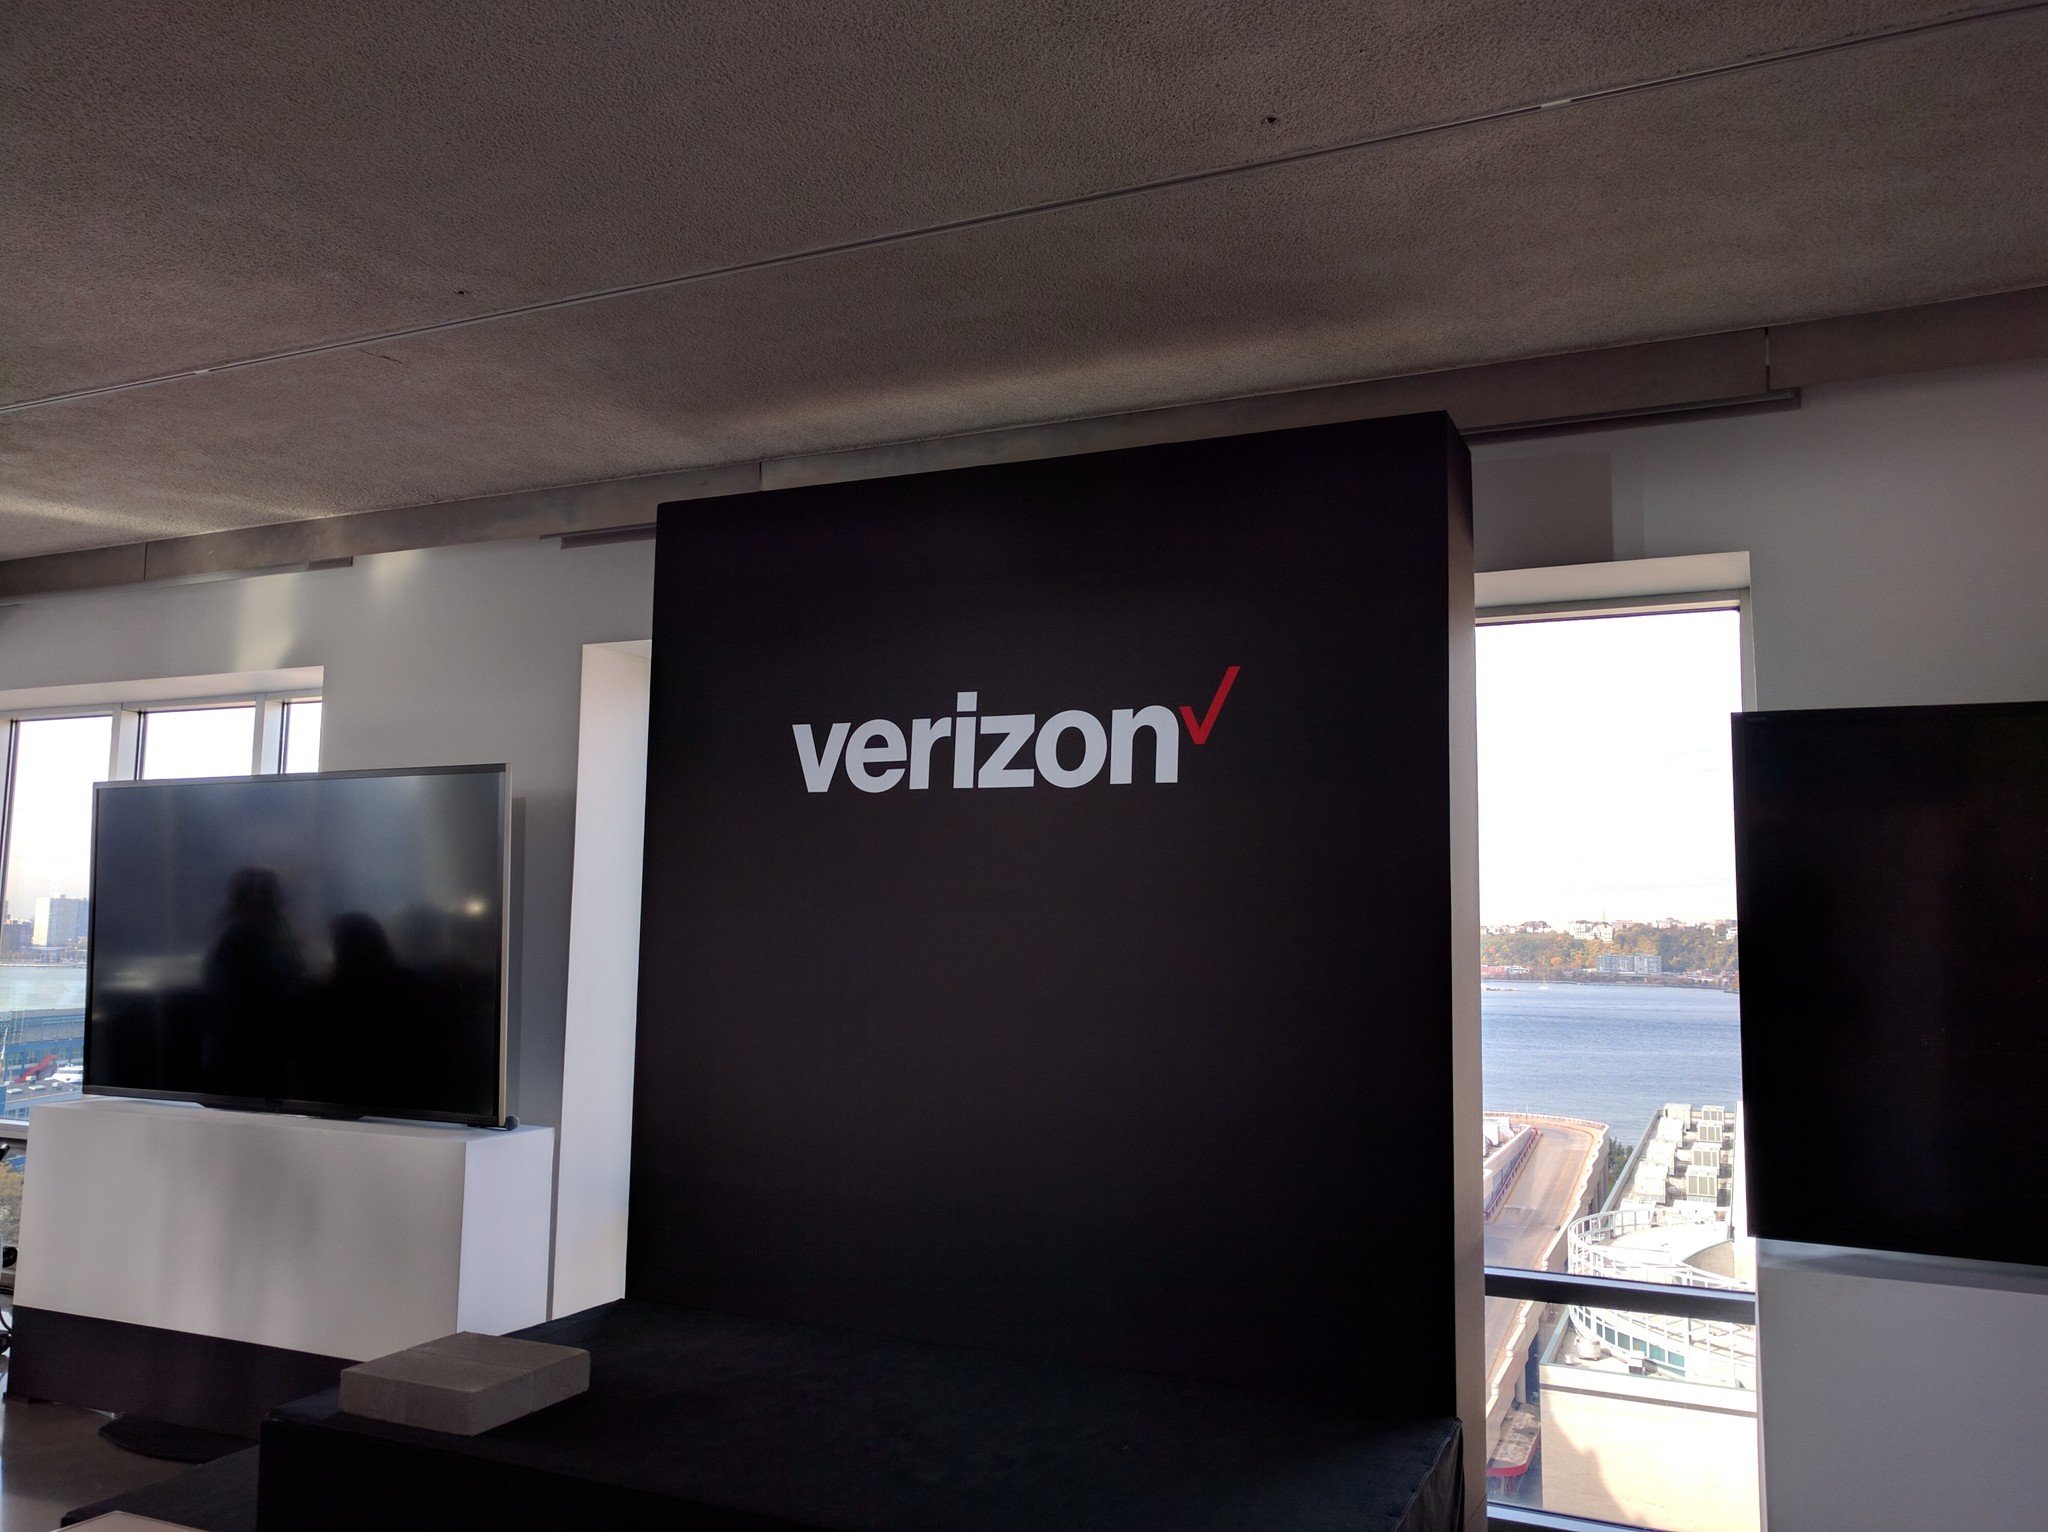 Verizon is paying $650 to cover switching costs